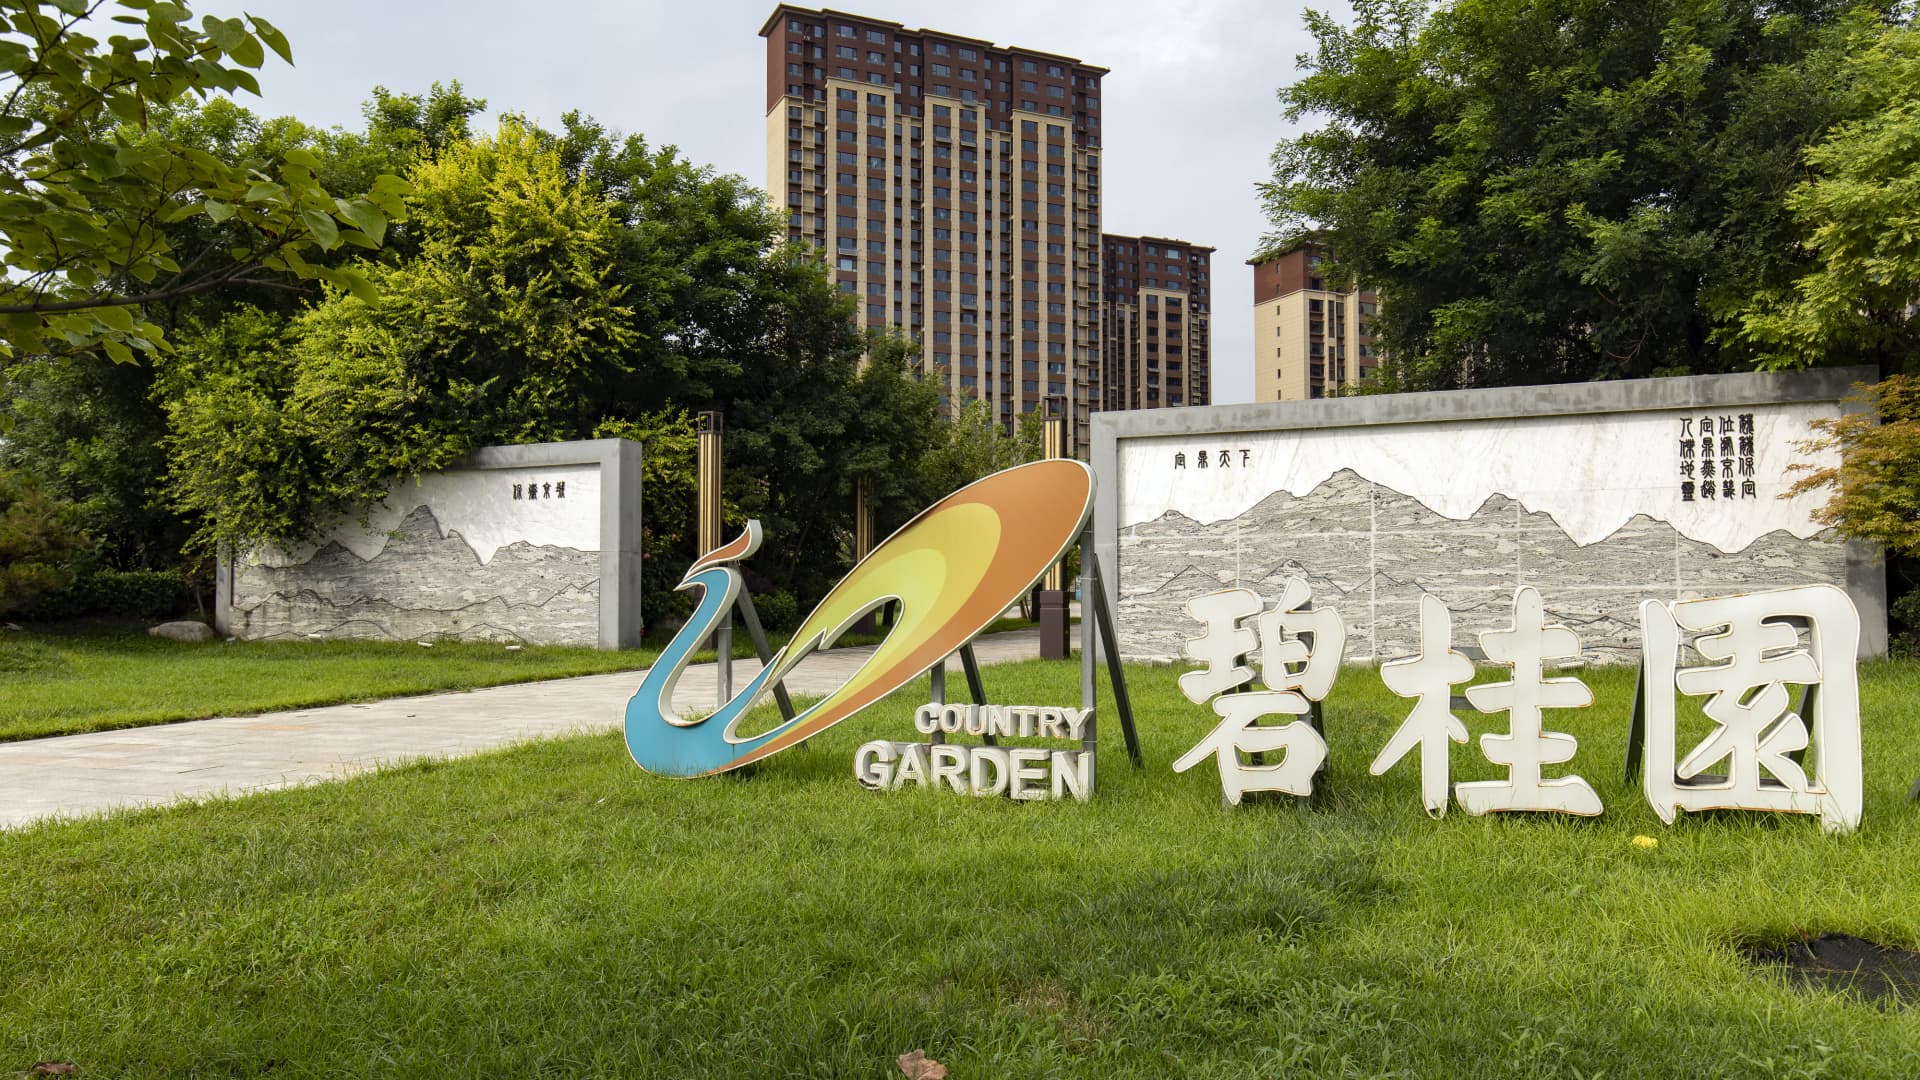 Country Garden says it may not be able to repay debt, warns of uncertainty around liquidity position